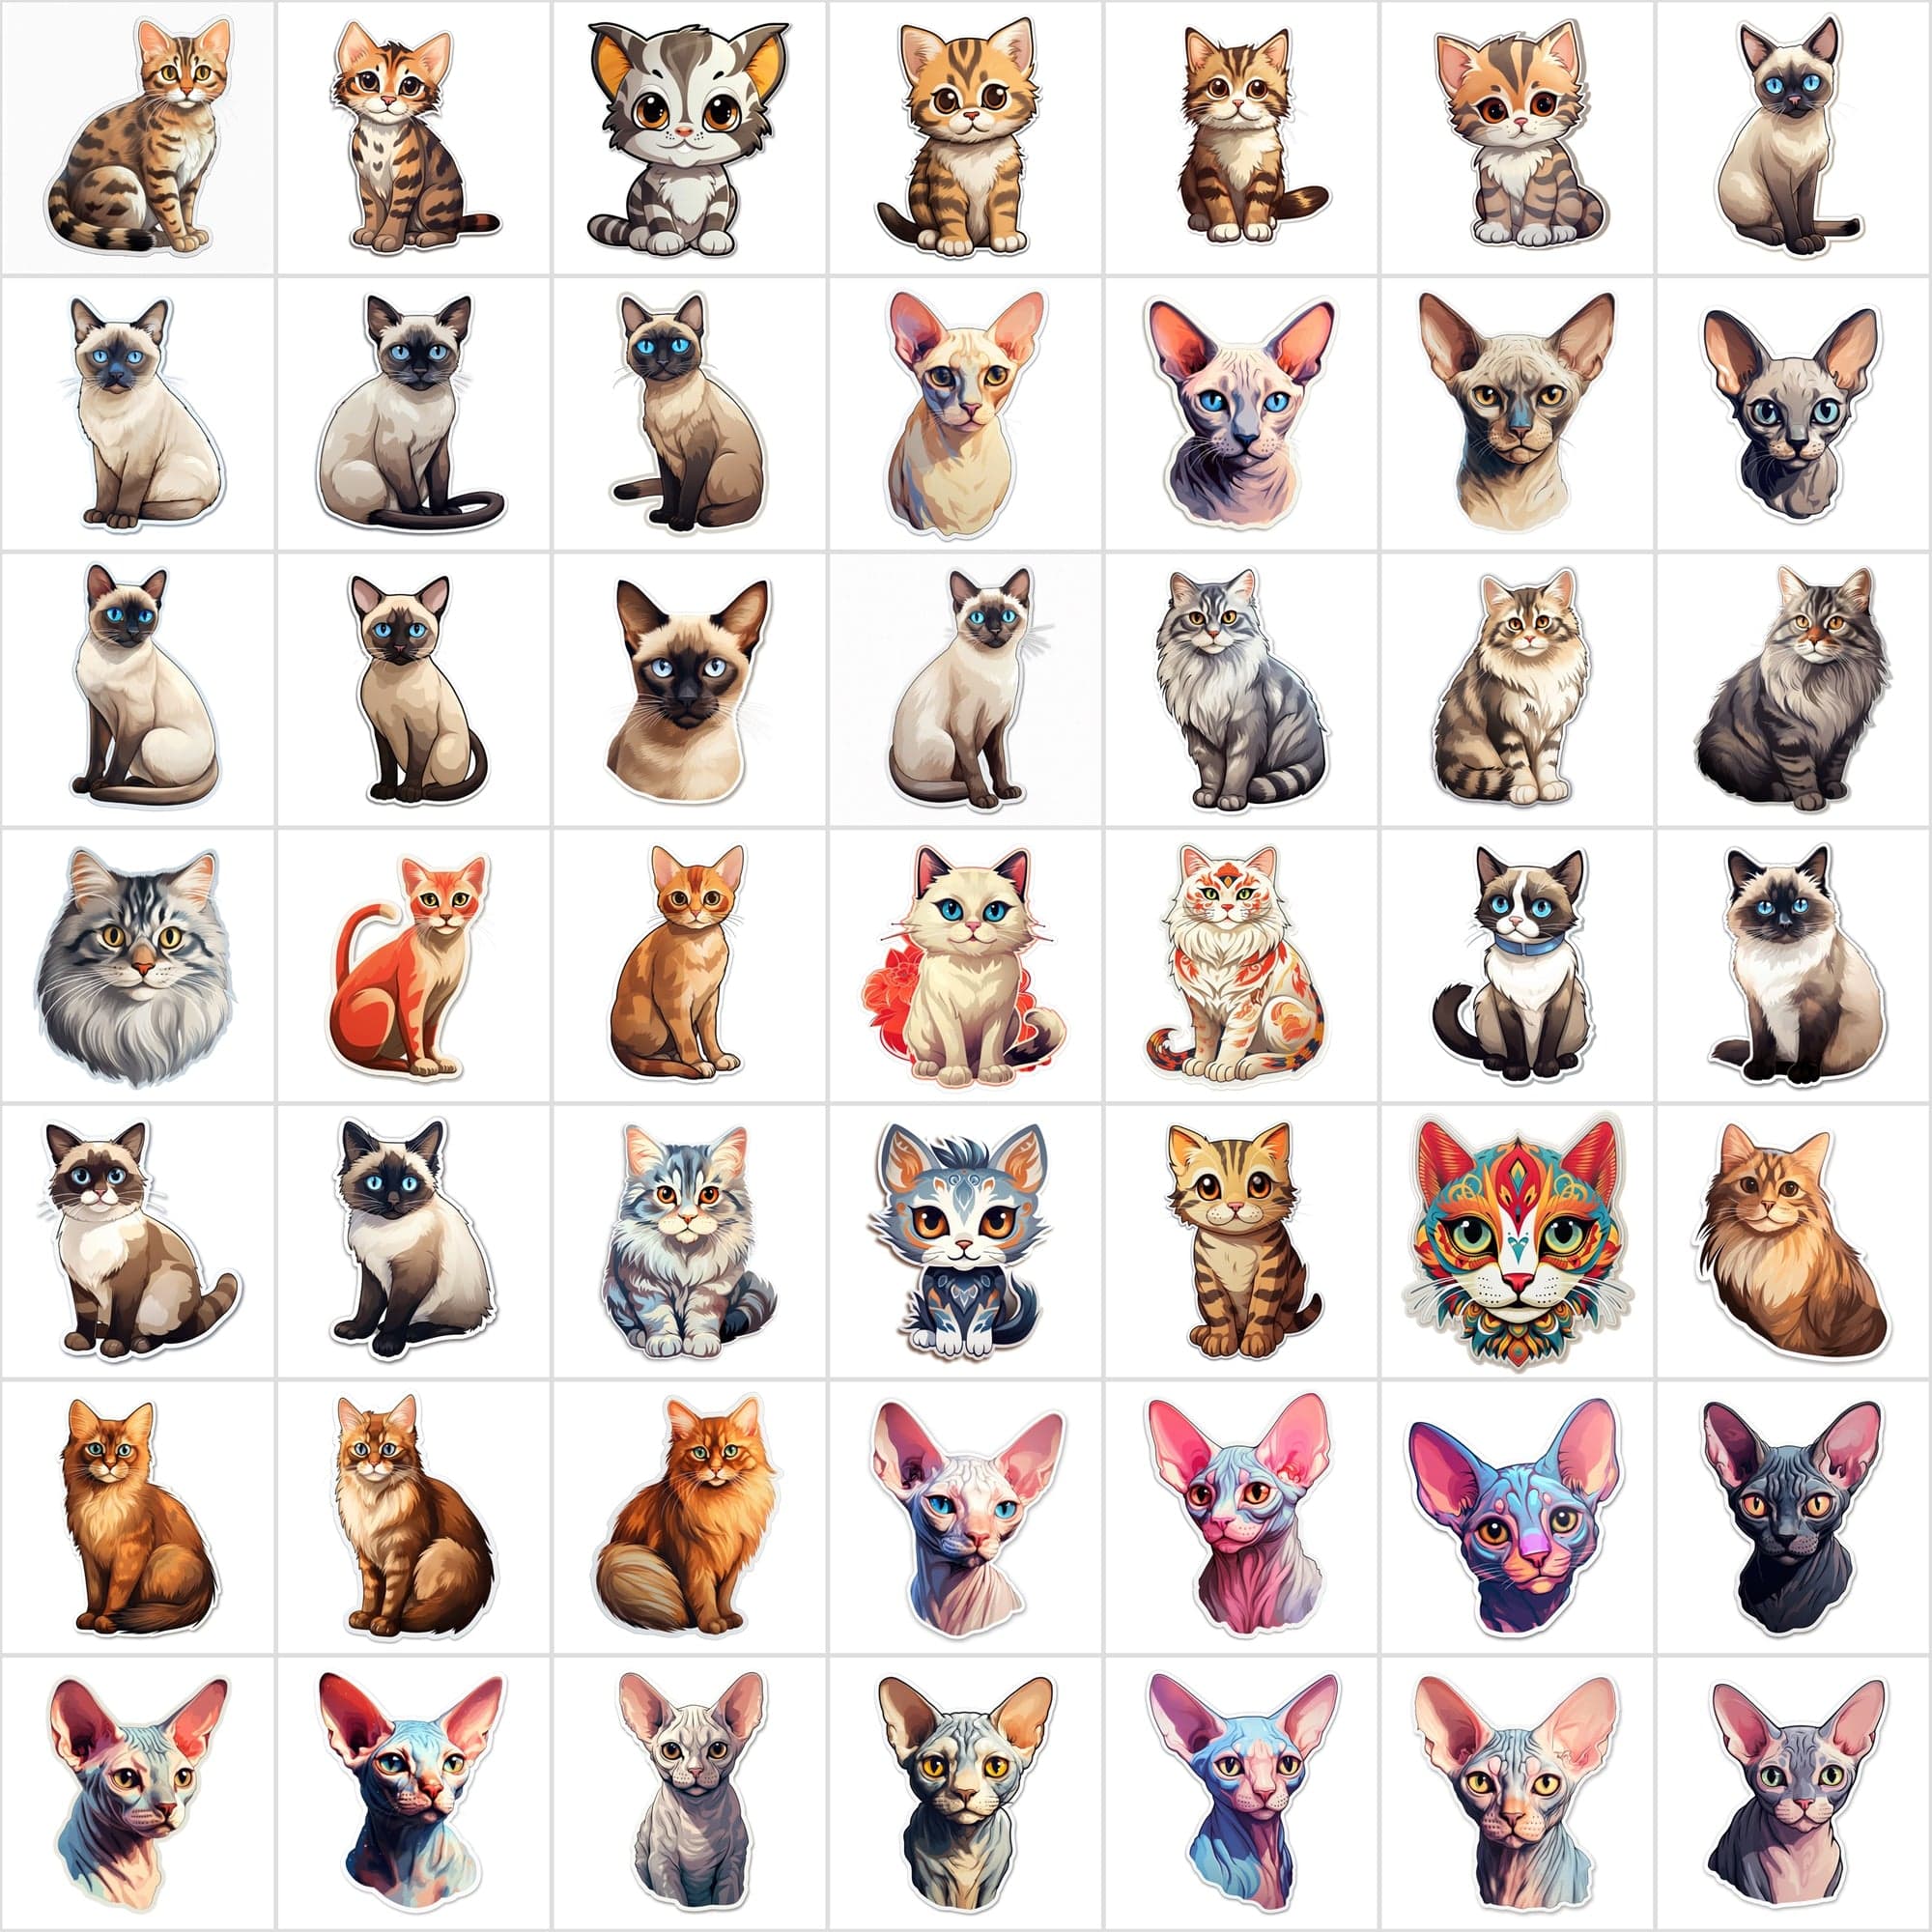 800 High-Res Cat Stickers, PNG Files, Transparent & White Background, Commercial License Included Digital Download Sumobundle